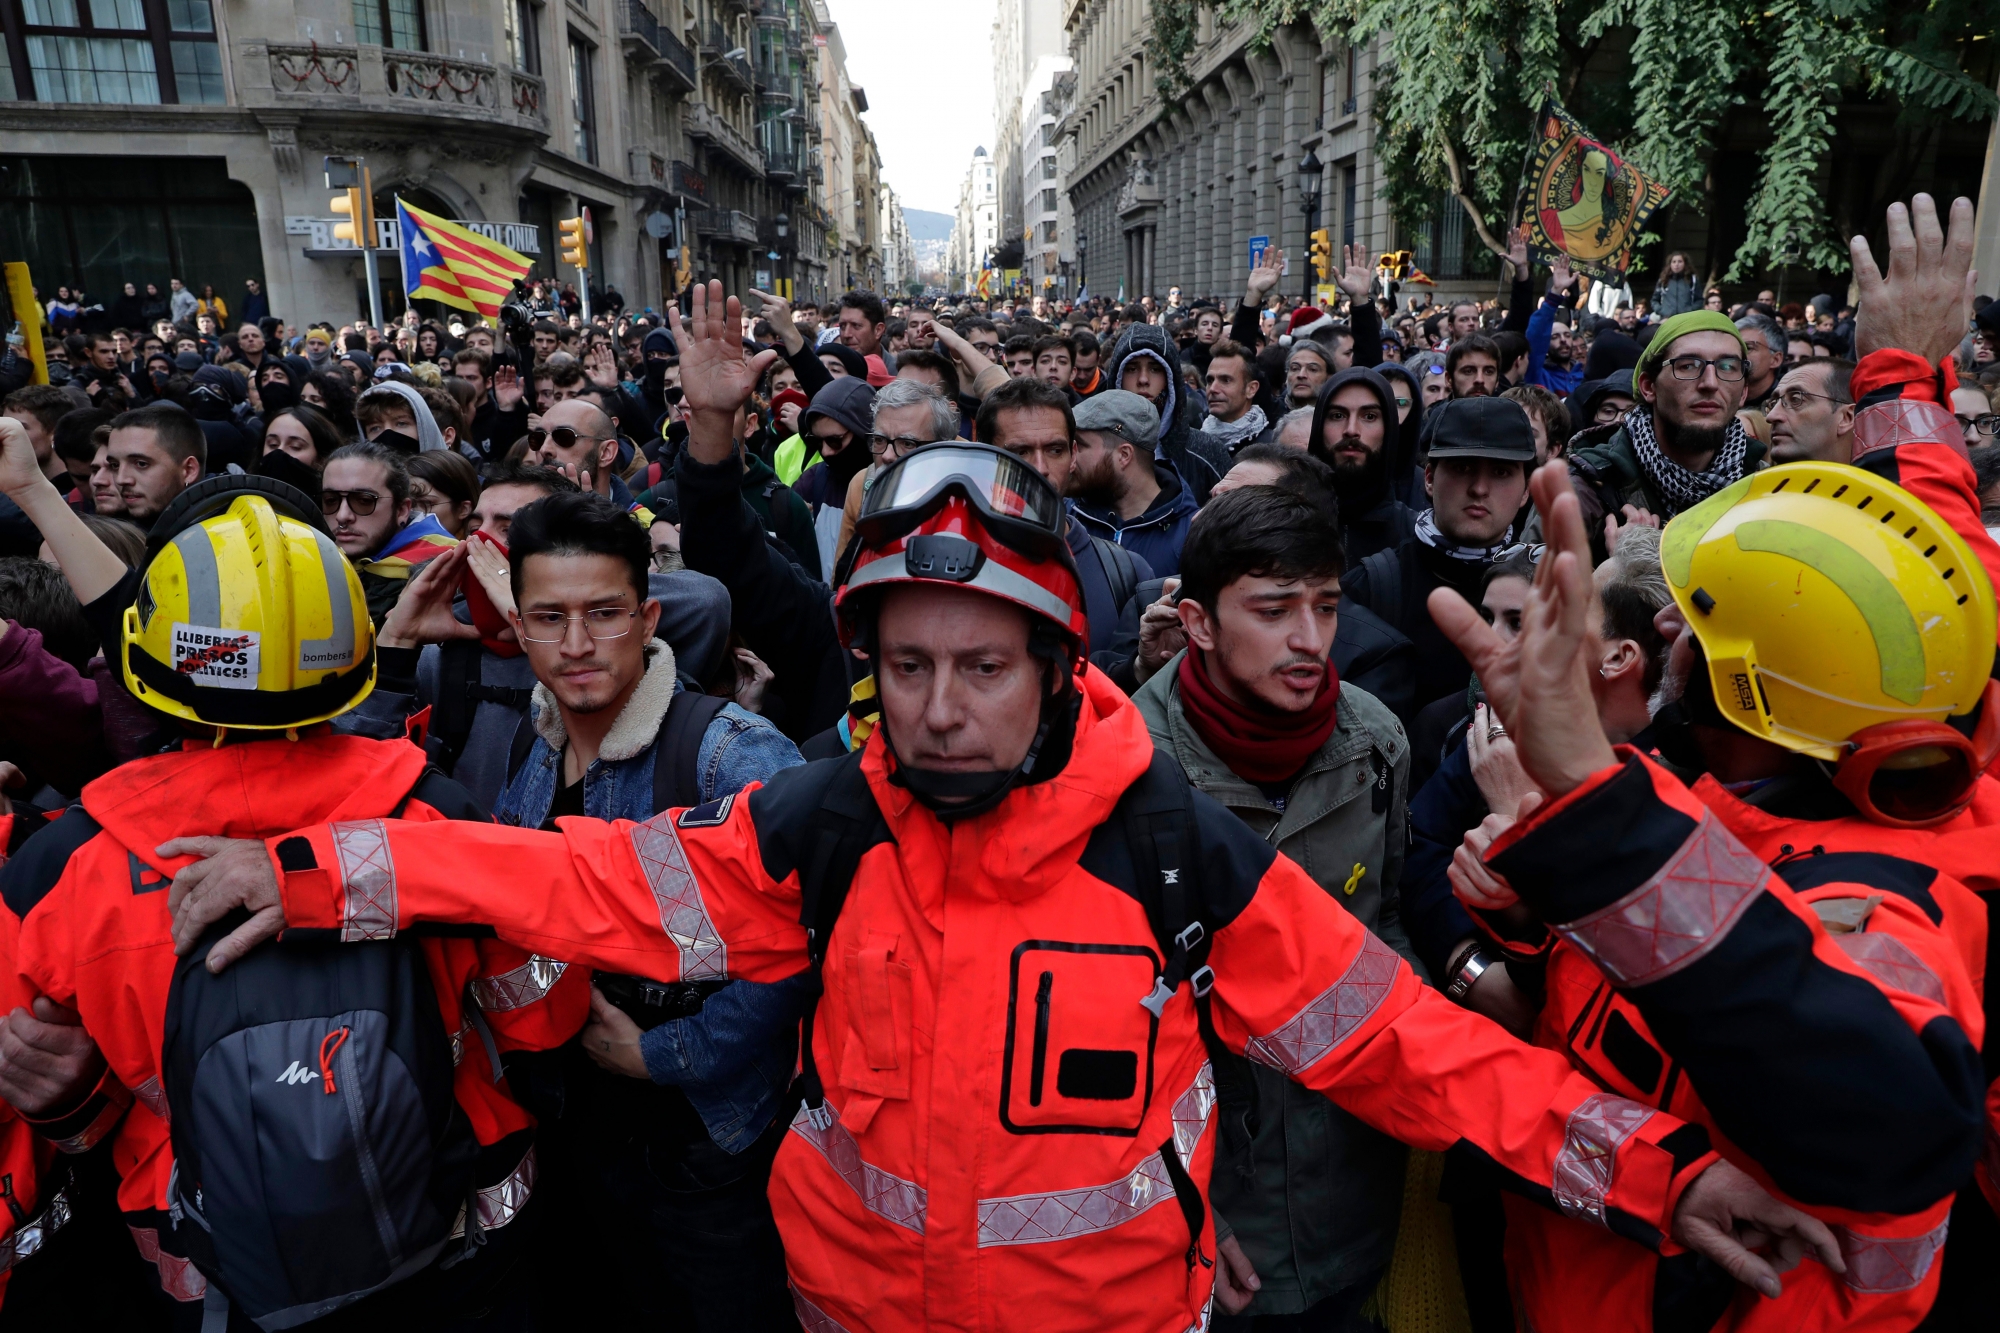 Firefighters help to control the demonstrators during a protest against Spain's cabinet holding a meeting in Barcelona Spain, Friday Dec. 21, 2018. Scuffles broke out between protesters trying to reach the venue of the cabinet meeting and police trying to stop them on Friday in central Barcelona after pro-independence organizations called for peaceful demonstrations against the meeting across the city. (AP Photo/Manu Fernandez) Spain Catalonia